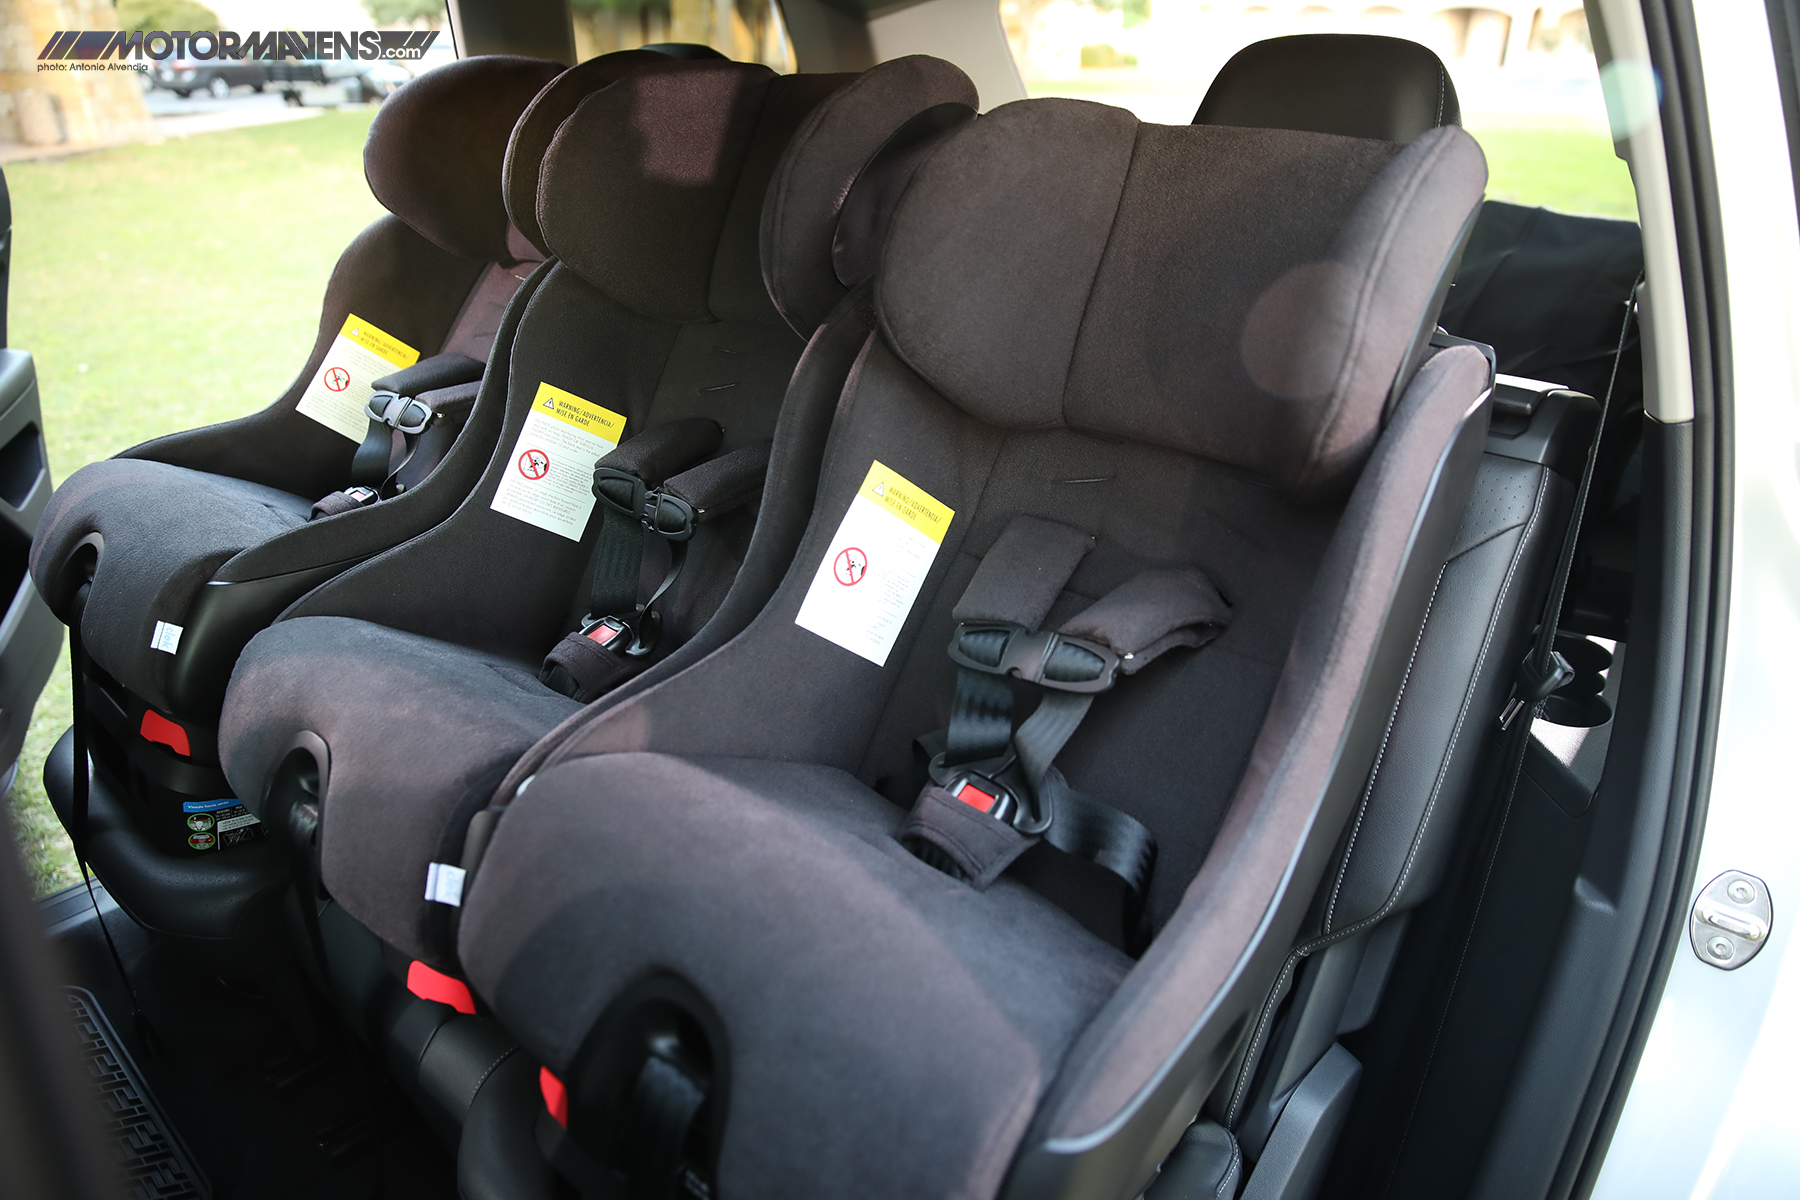 3 Baby Seats fit in VW Atlas 7 seat 3 row SUV interior 4Motion AWD Turbocharged